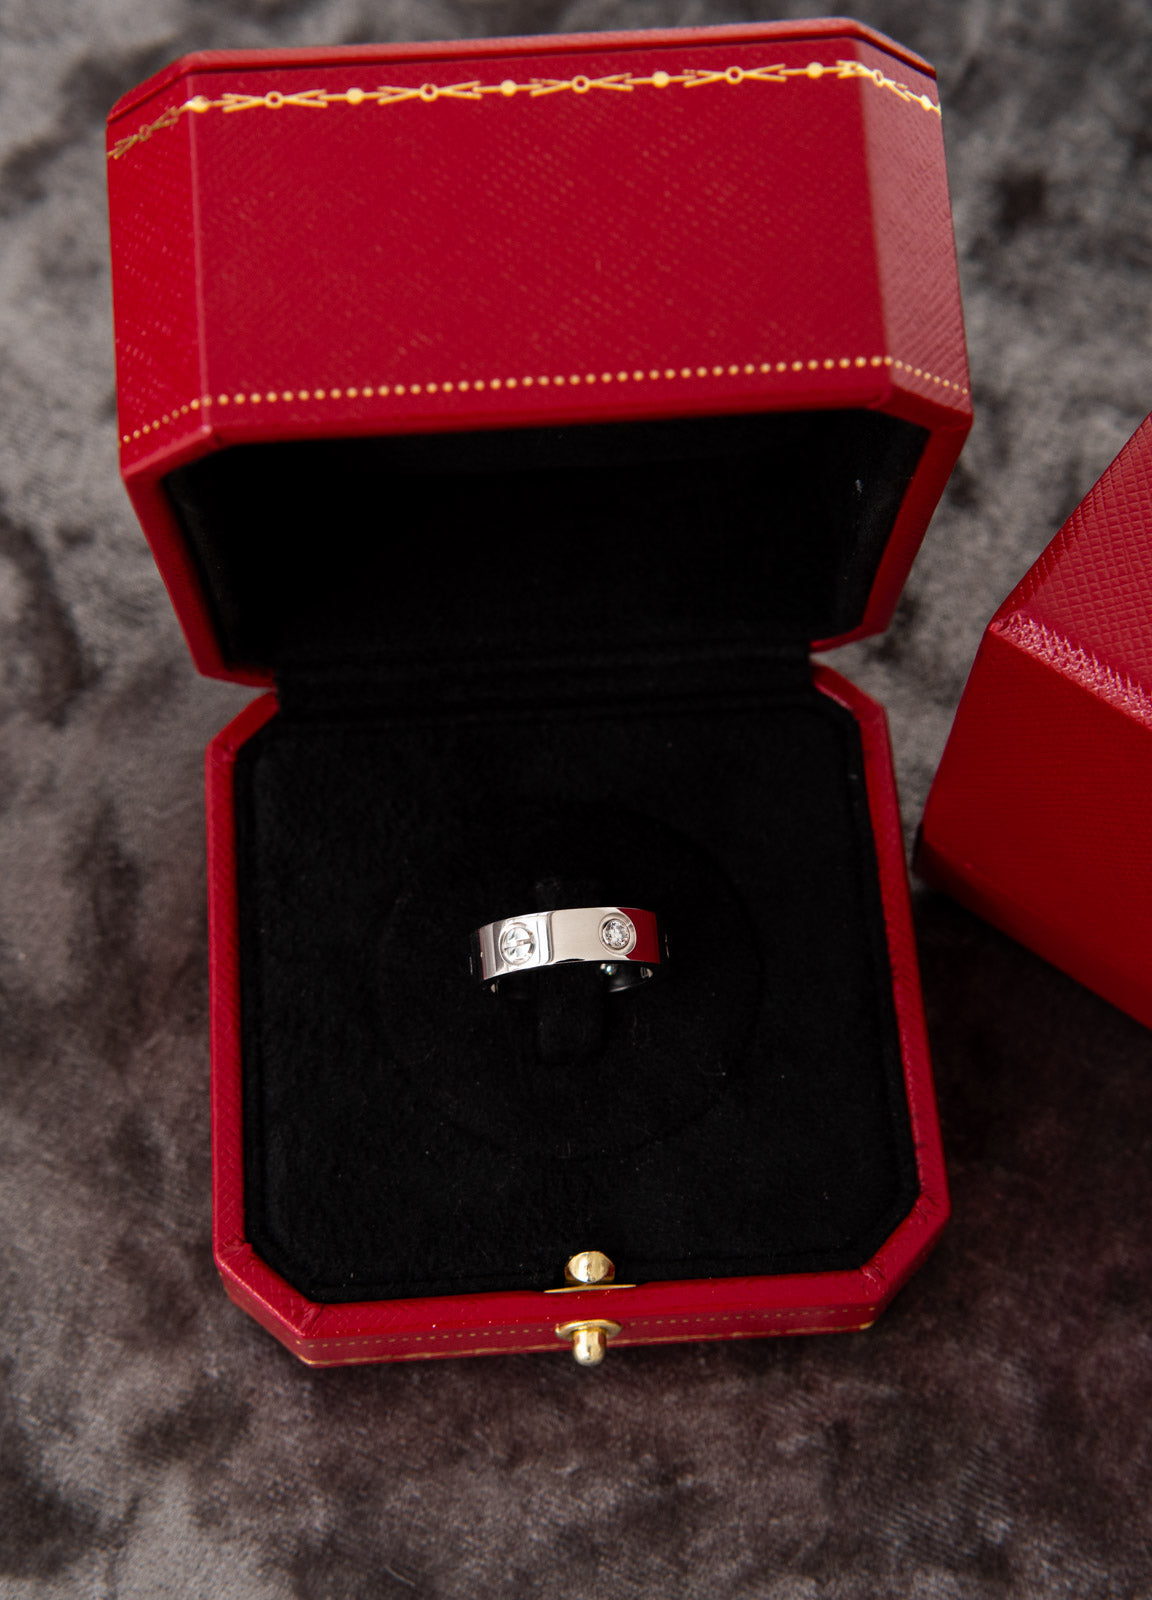 Cartier White Gold Love Ring With Diamonds - Image 3 of 4